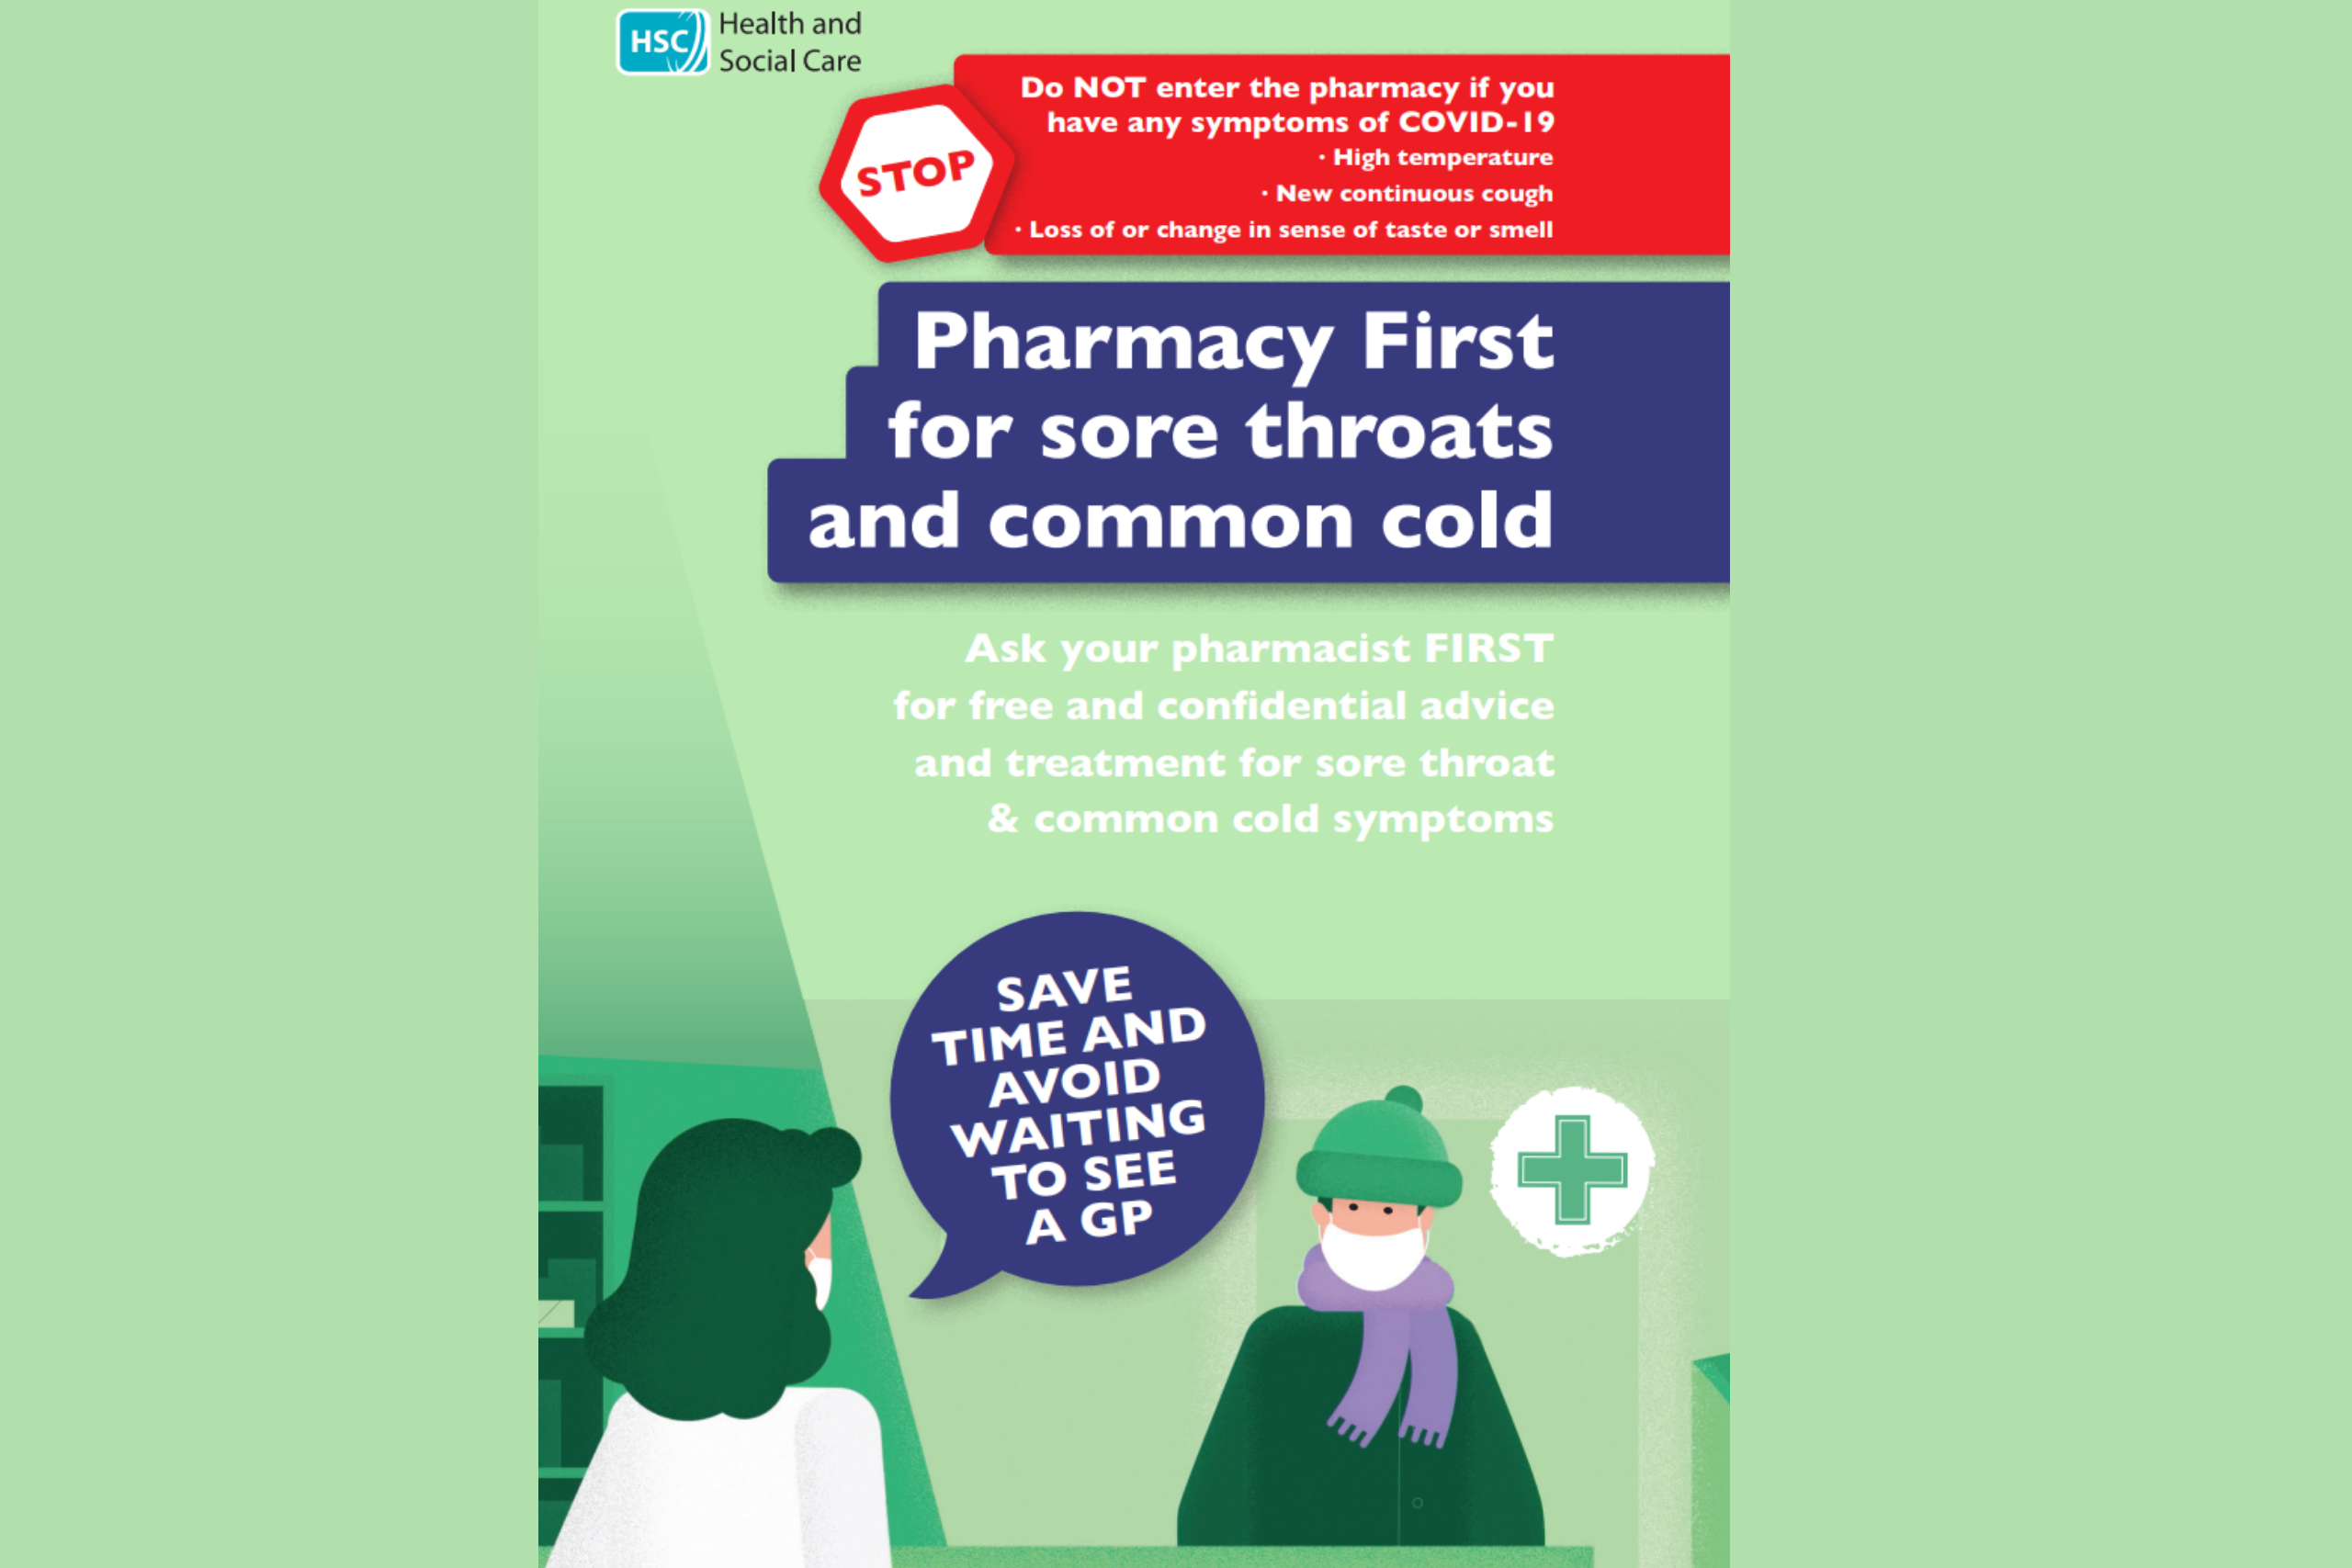 Pharmacy First Service launched for winter ailments